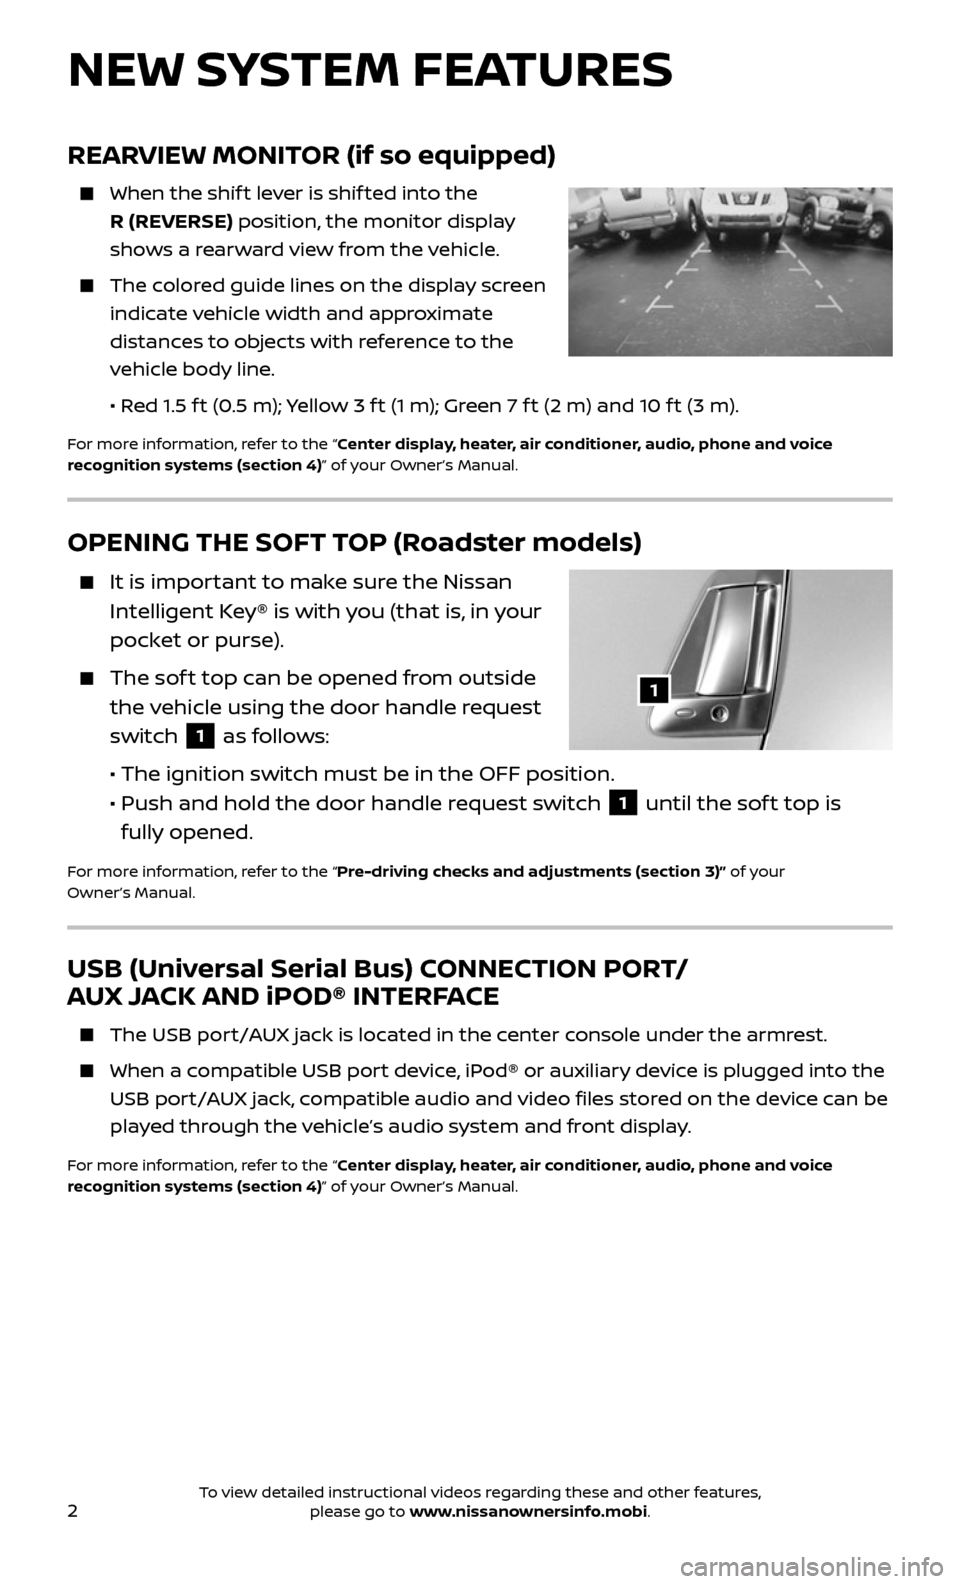 NISSAN 370Z ROADSTER 2017 Z34 Quick Reference Guide 2
OPENING THE SOFT TOP (Roadster models)
    It is important to make sure the Nissan 
Intelligent Key® is with you (that is, in your 
pocket or purse).
    The soft top can be opened from outside 
th